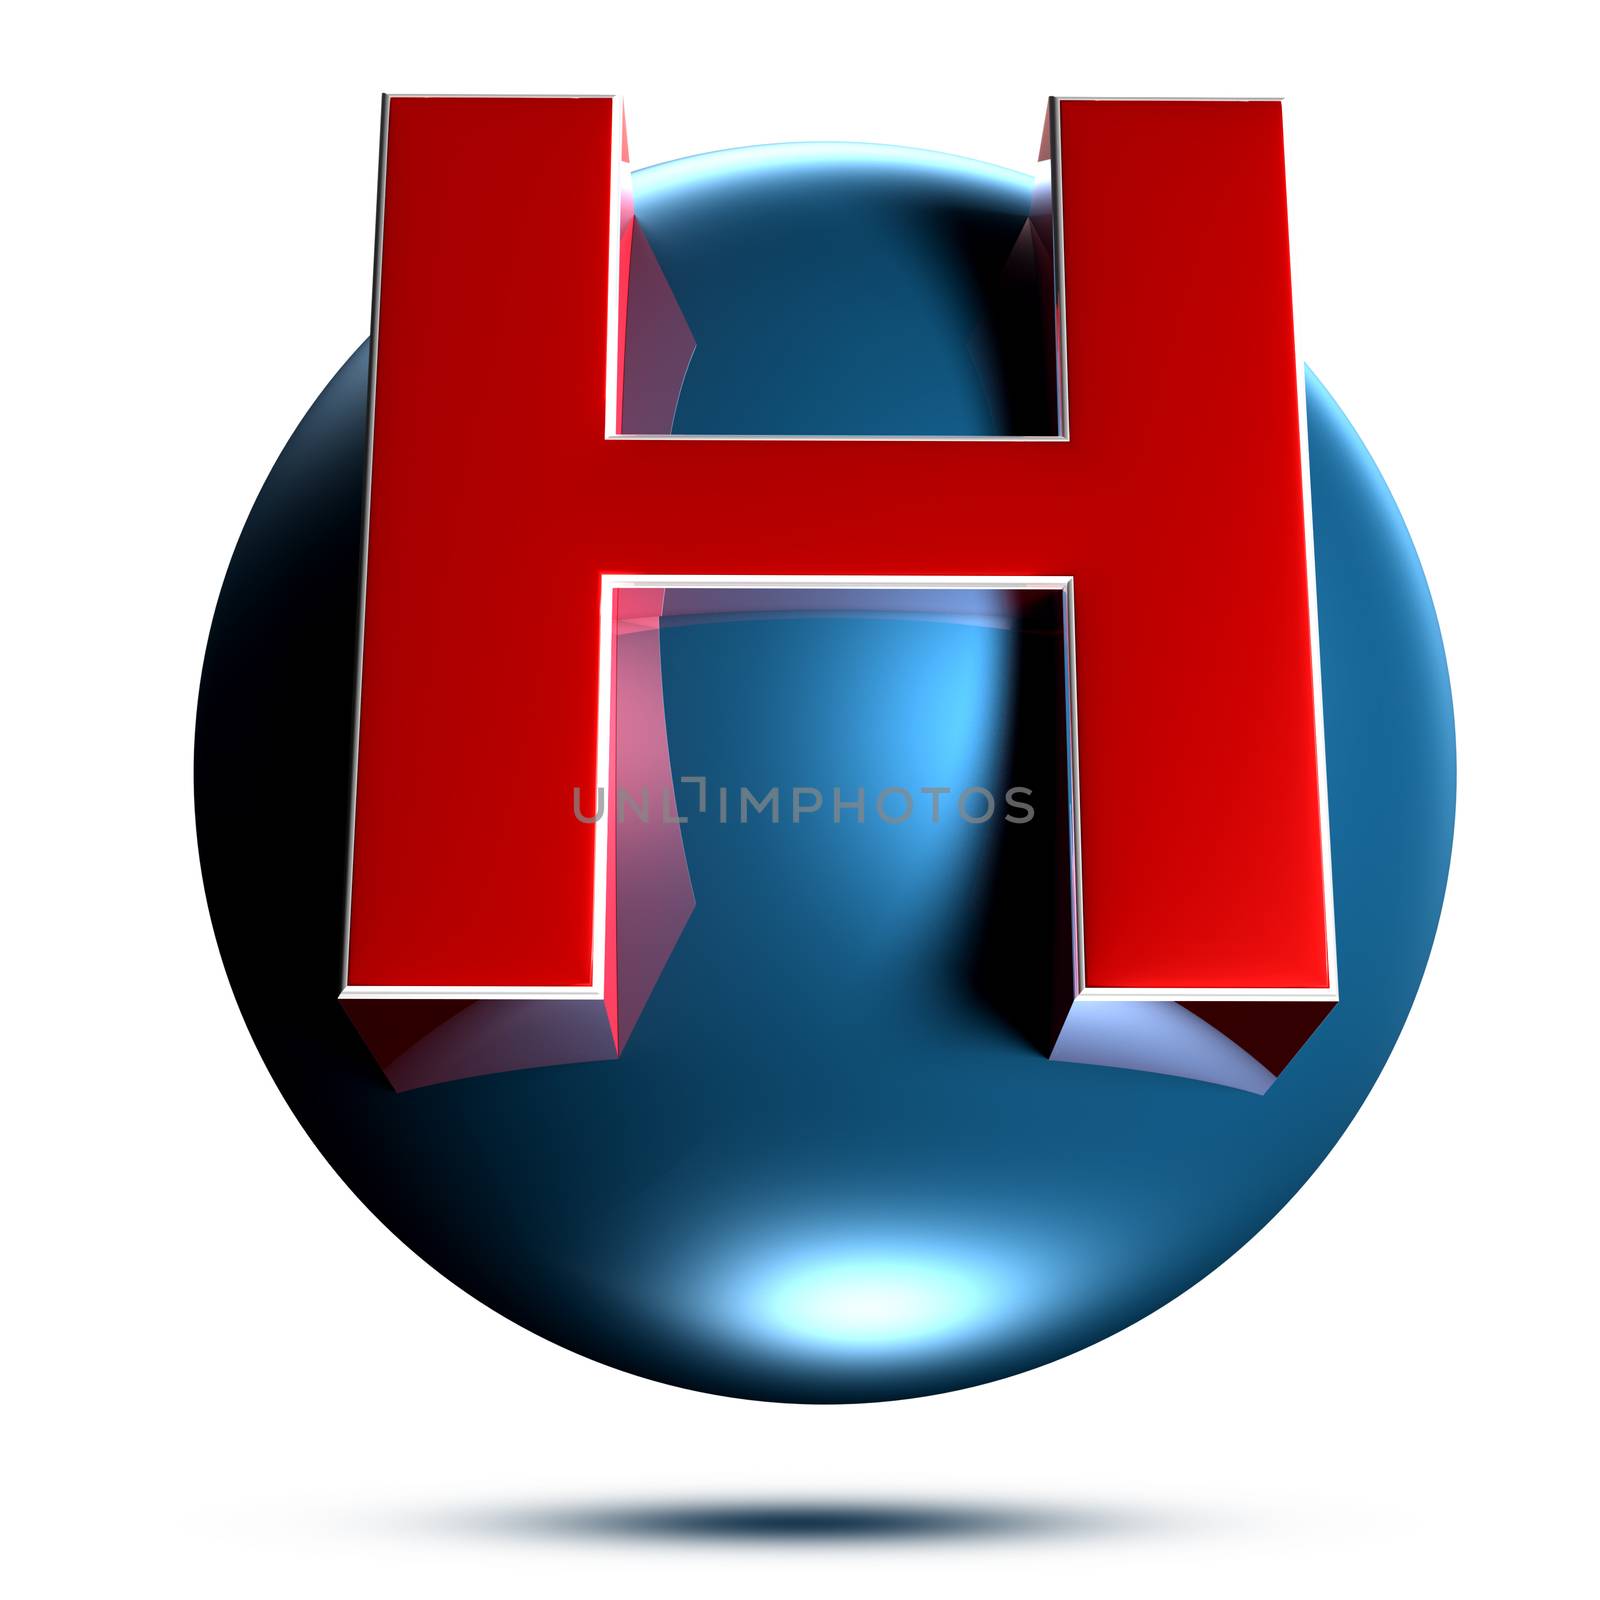 H logo isolated on white background illustration 3D rendering with clipping path.